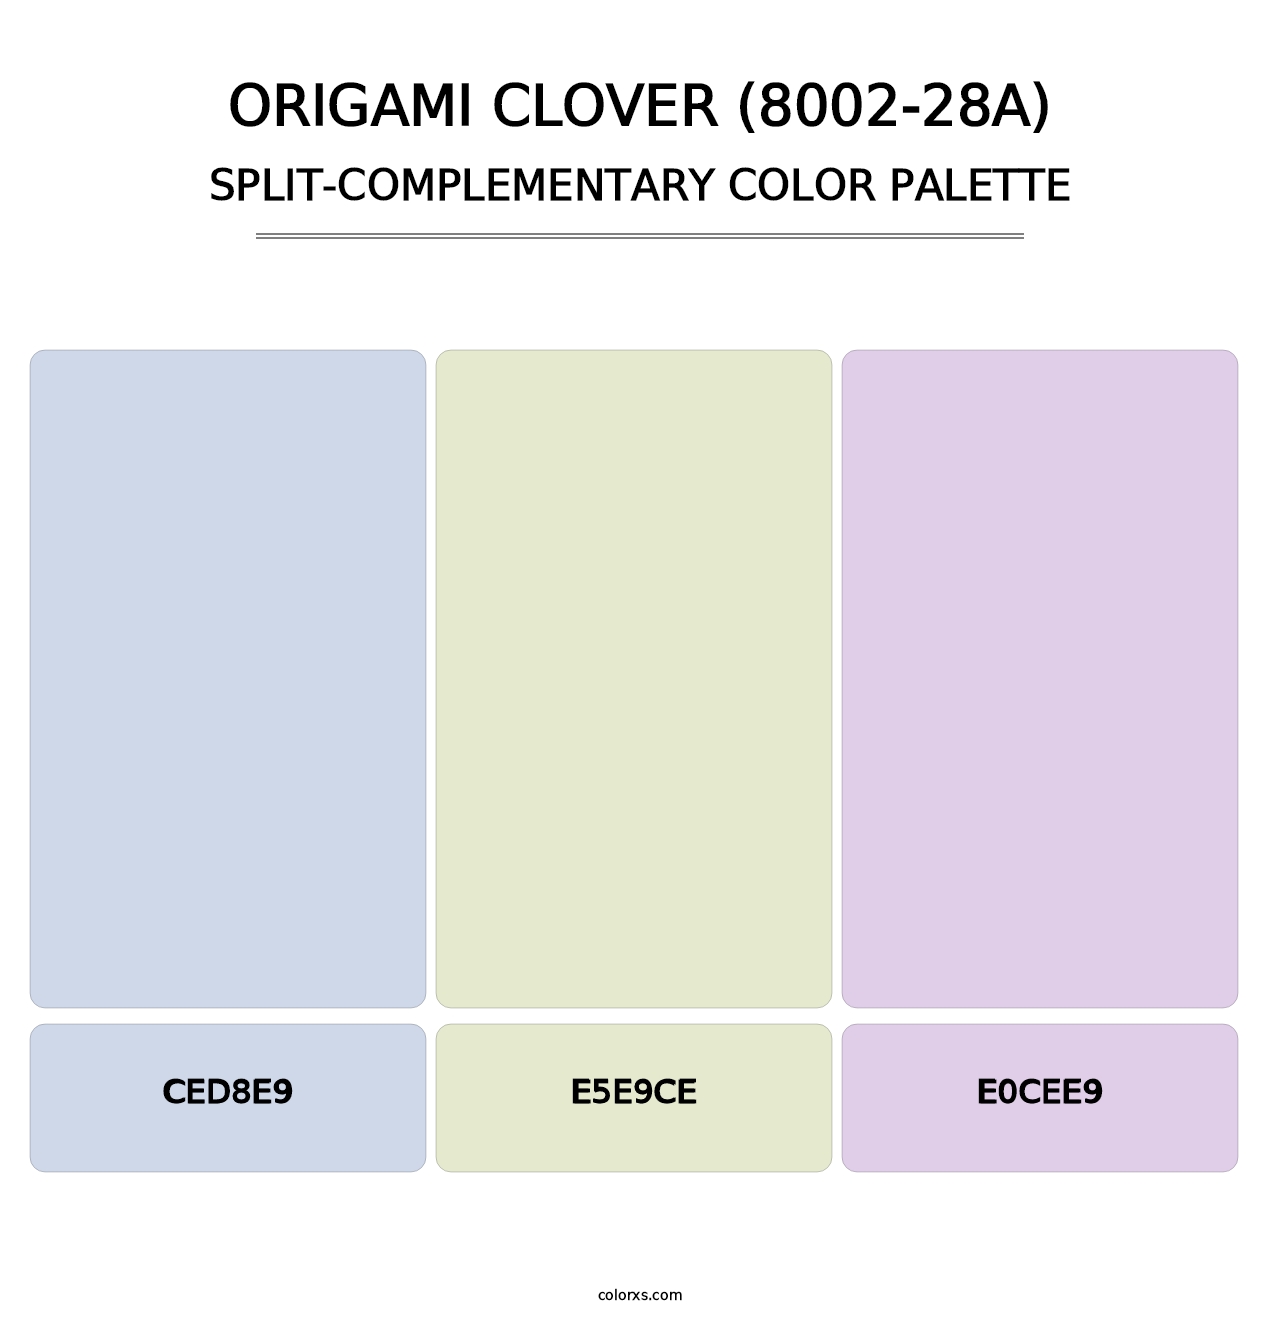 Origami Clover (8002-28A) - Split-Complementary Color Palette